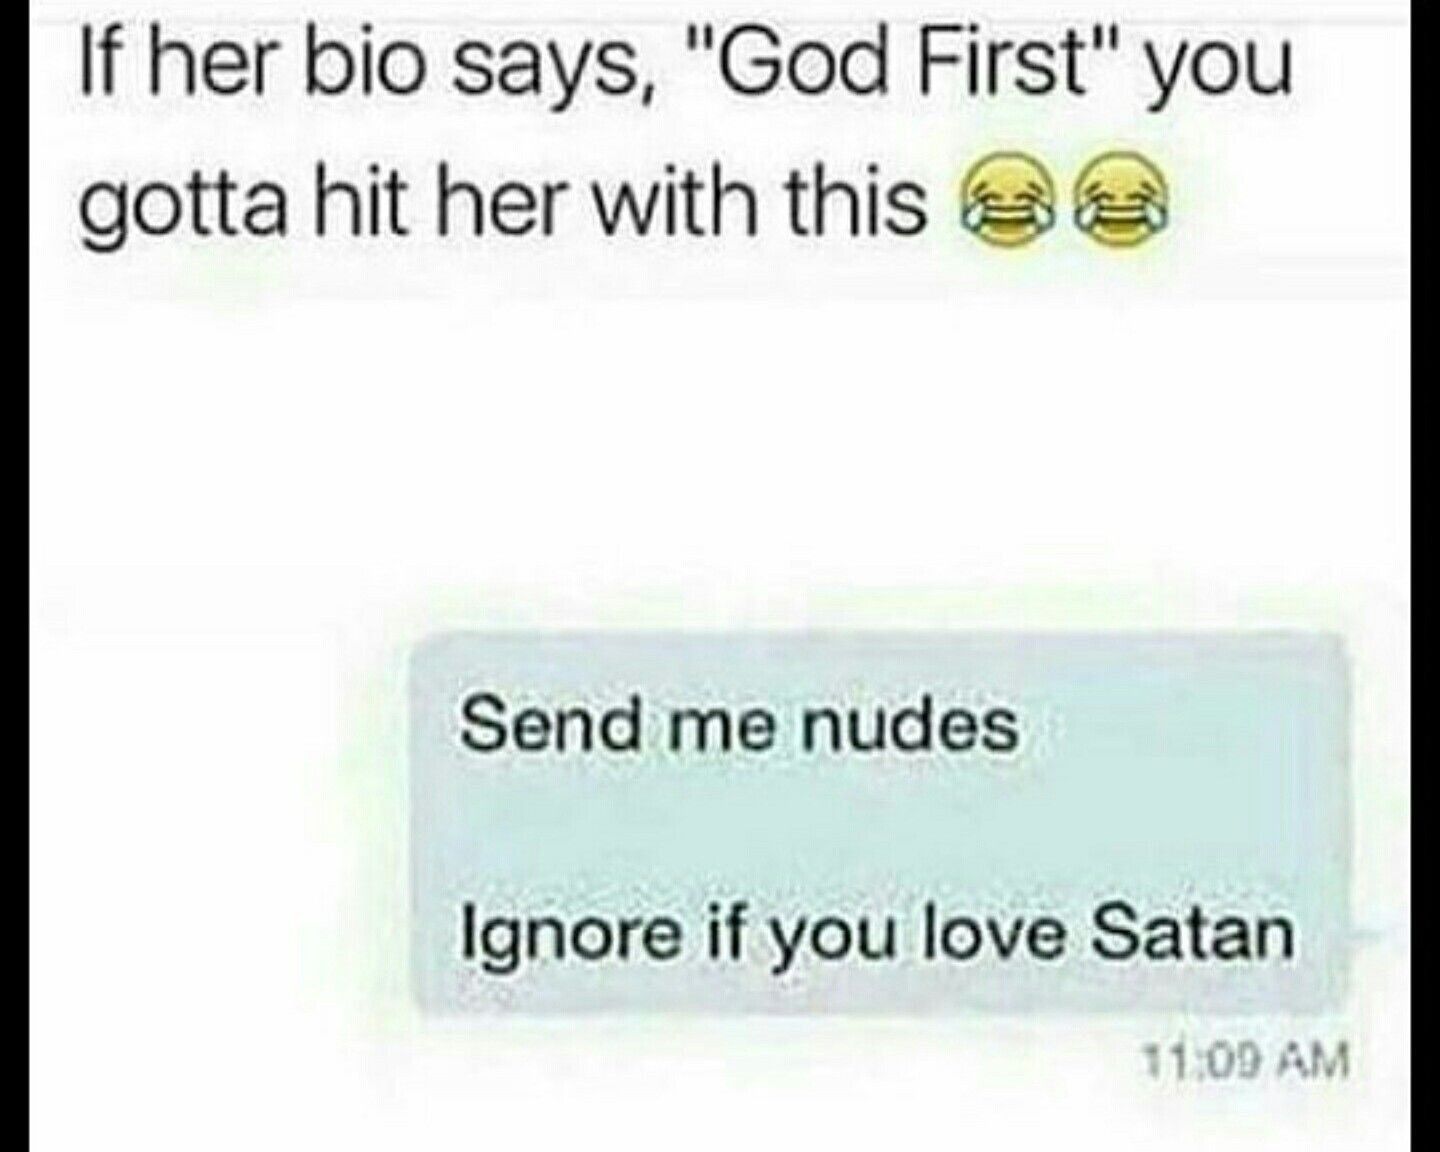 The eleventh commandment: "Thou shall send nudes when requested."